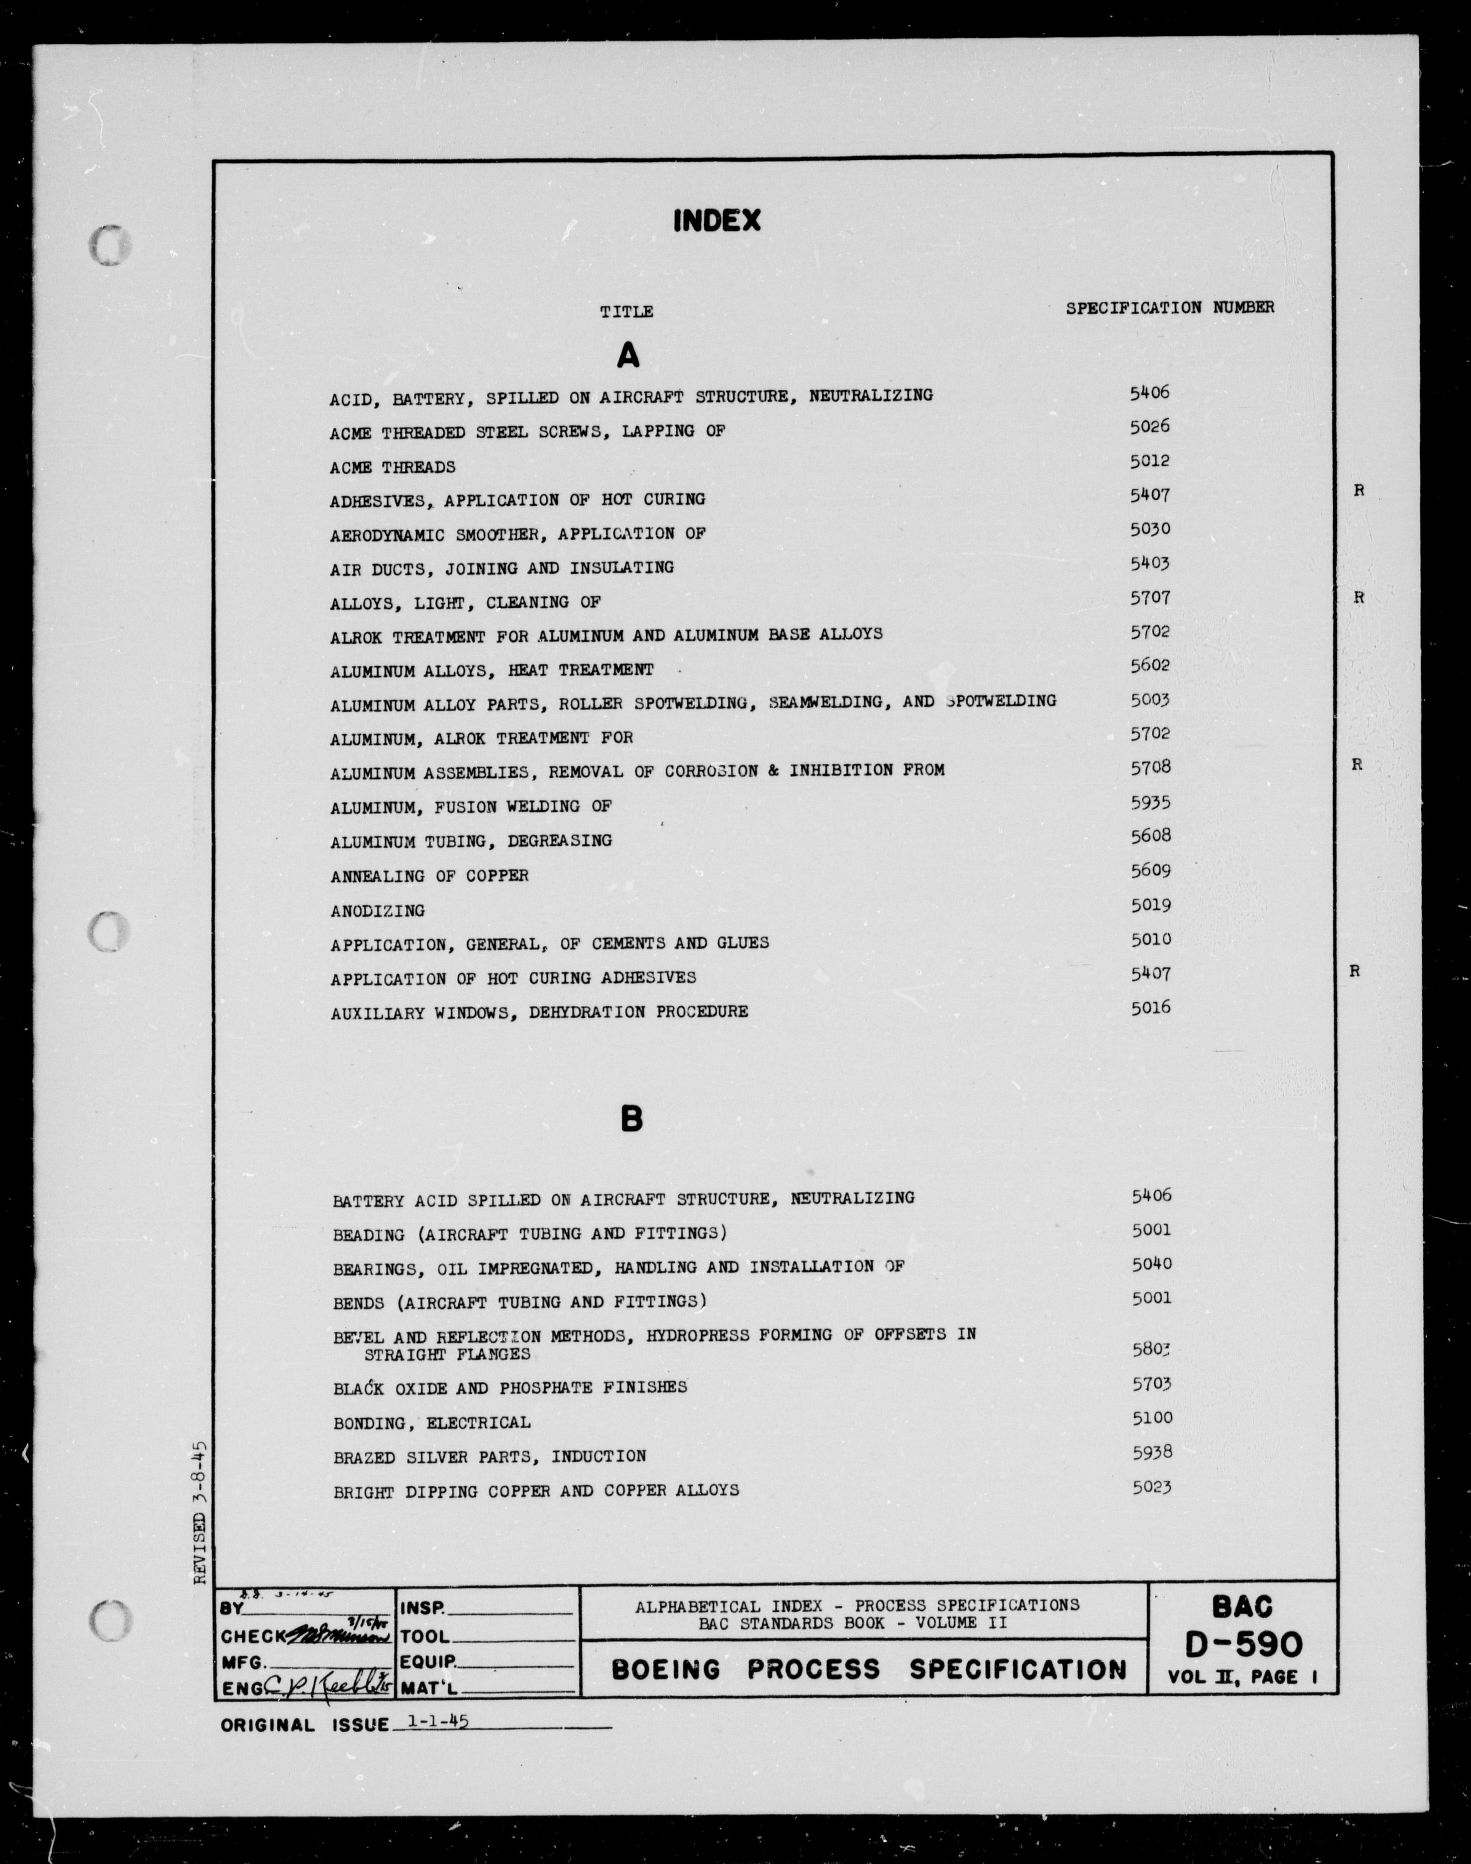 Sample page 1 from AirCorps Library document: Alphabetical Index - Process Specifications BAC Standards Book - Volume II